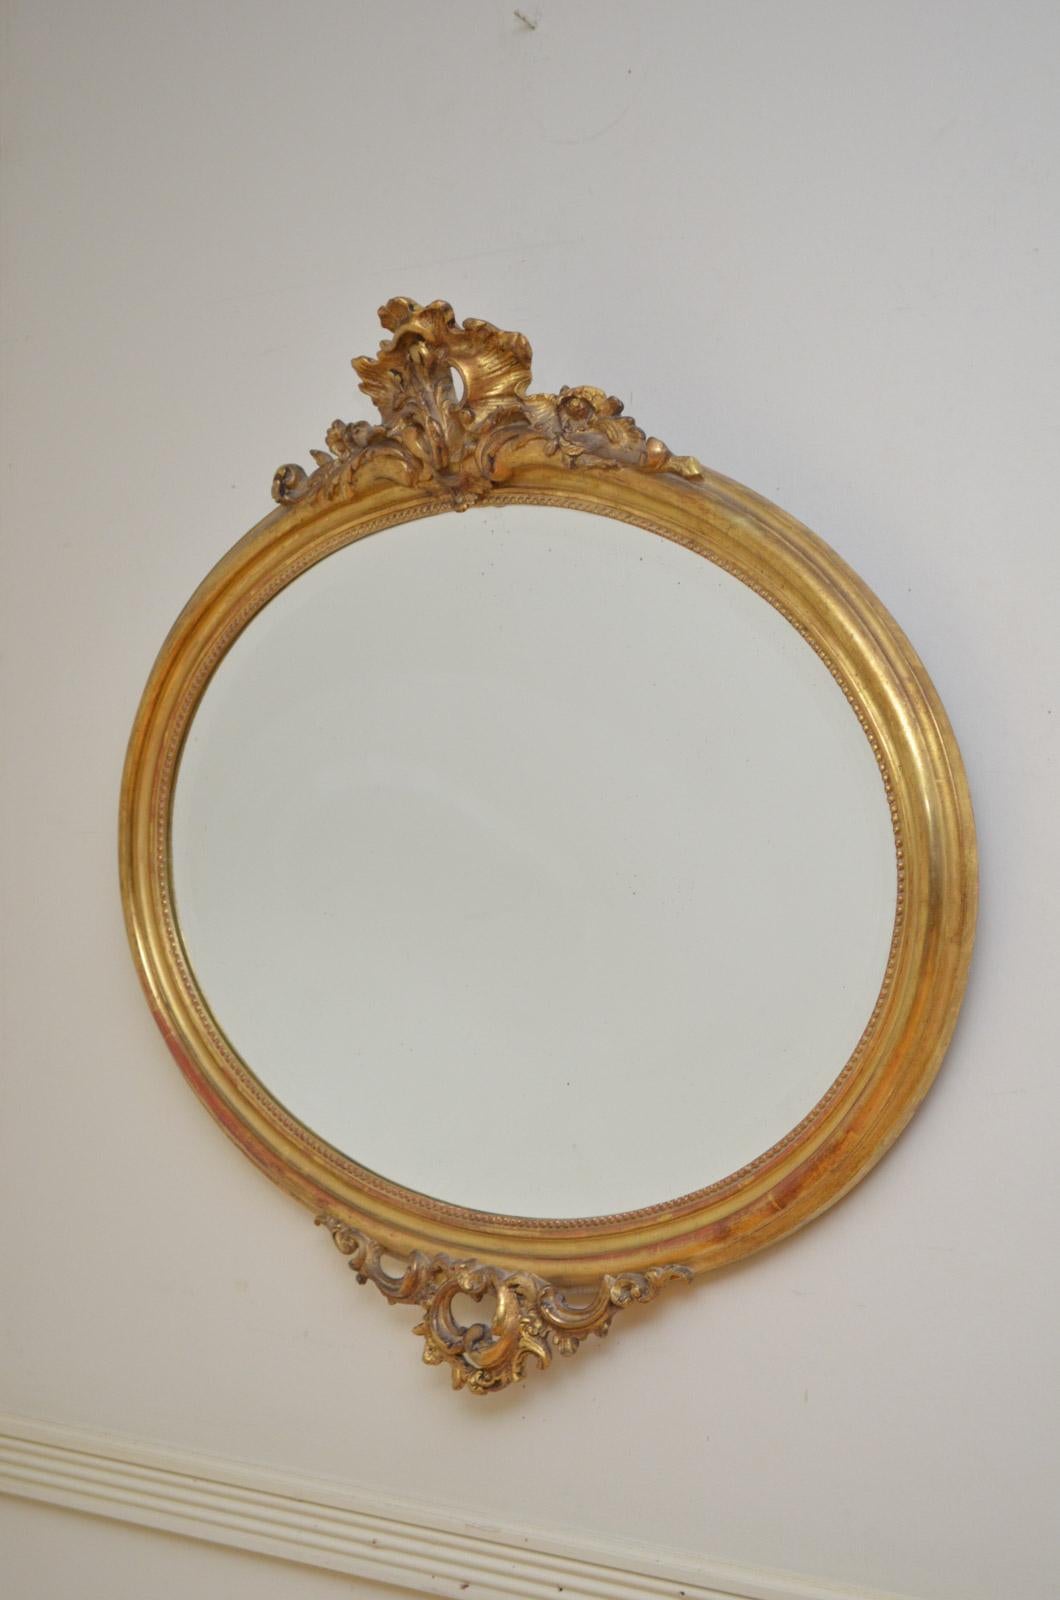 Sn4597 fine 19th century gilded mirror of oval form, having original bevelled edge glass in finely carved frame with centre cartouche to top and base. This antique mirror is in excellent original condition throughout, circa 1870
Measures: H 32